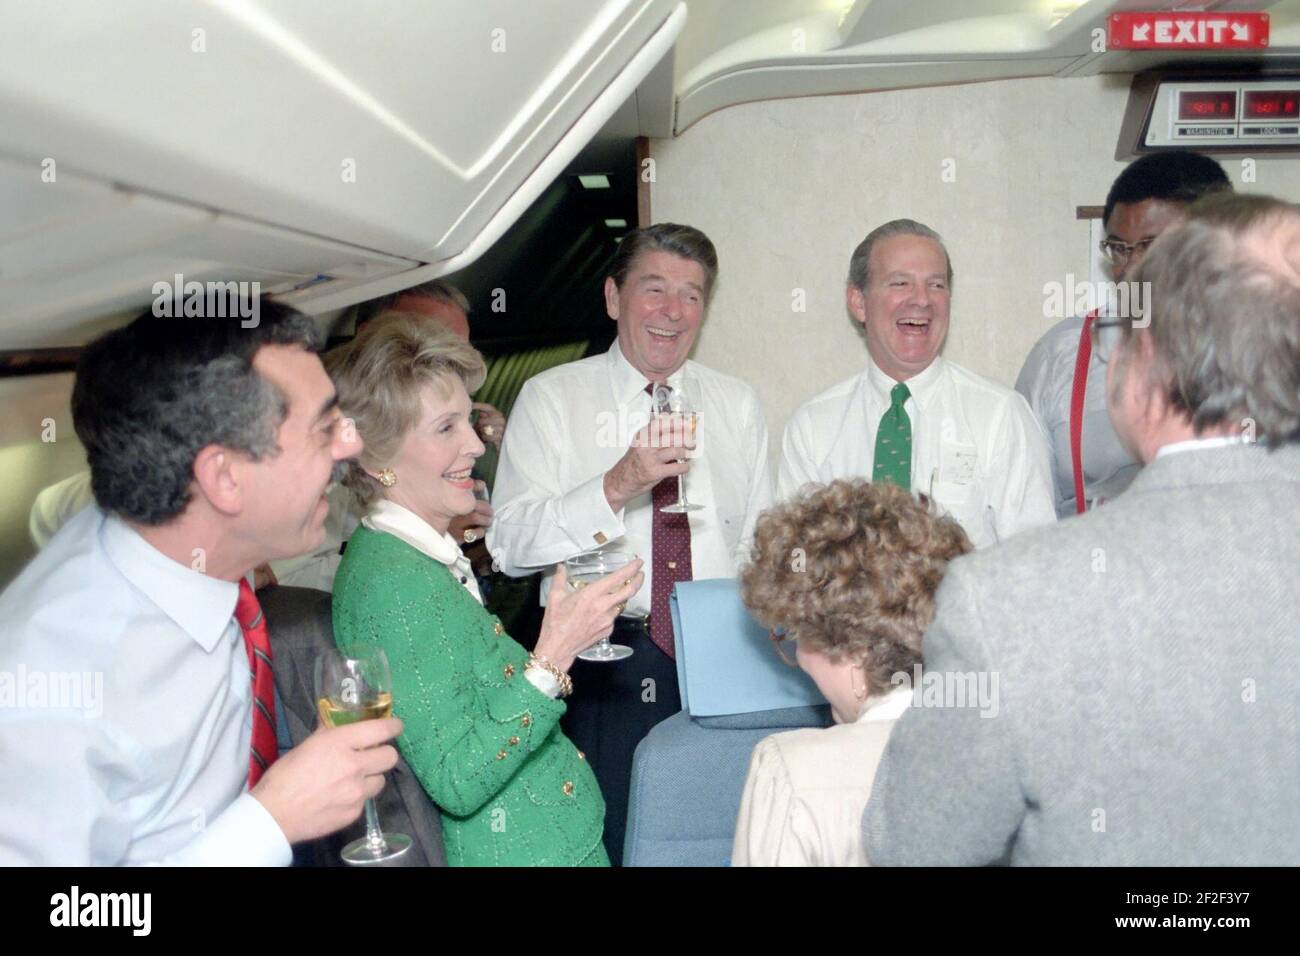 President Ronald Reagan, Nancy Reagan, James Baker, Ken Khachigian, Rosie Greer, and Lou Cannon celebrating the end of the 1984 presidential campaign. Stock Photo